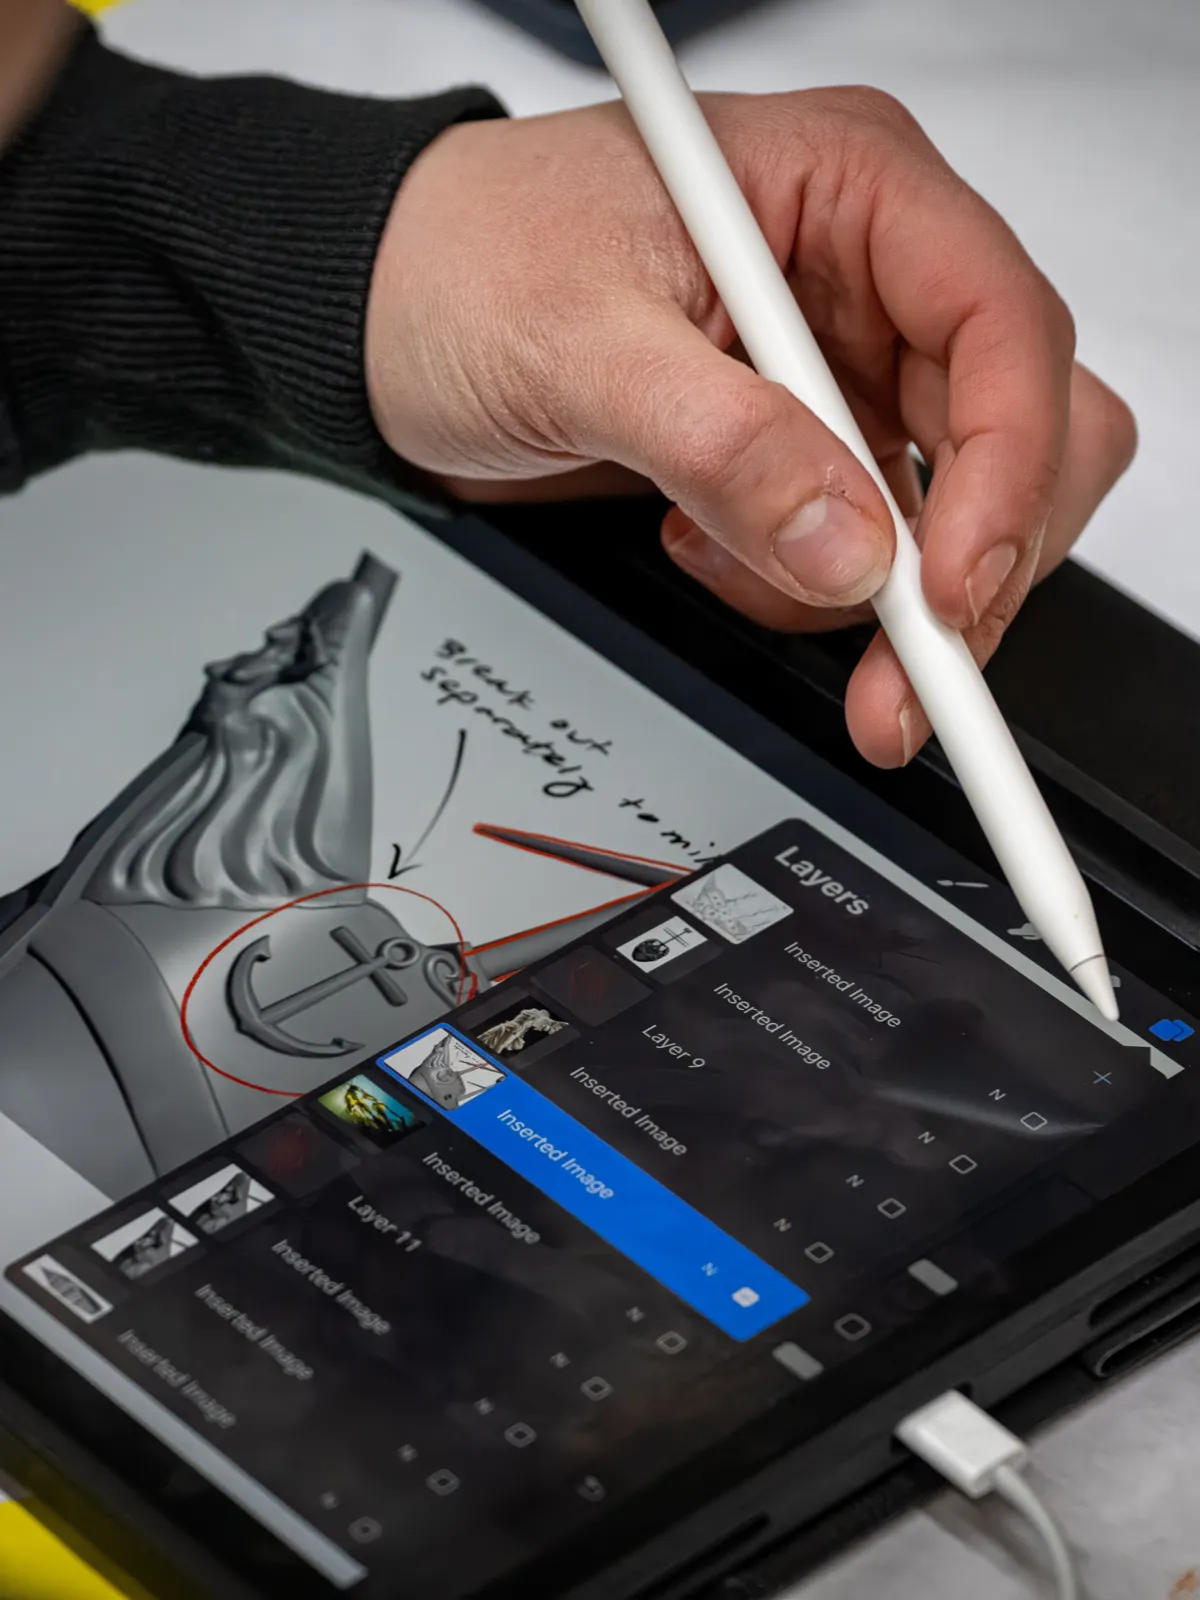 Artist planning work on a tablet